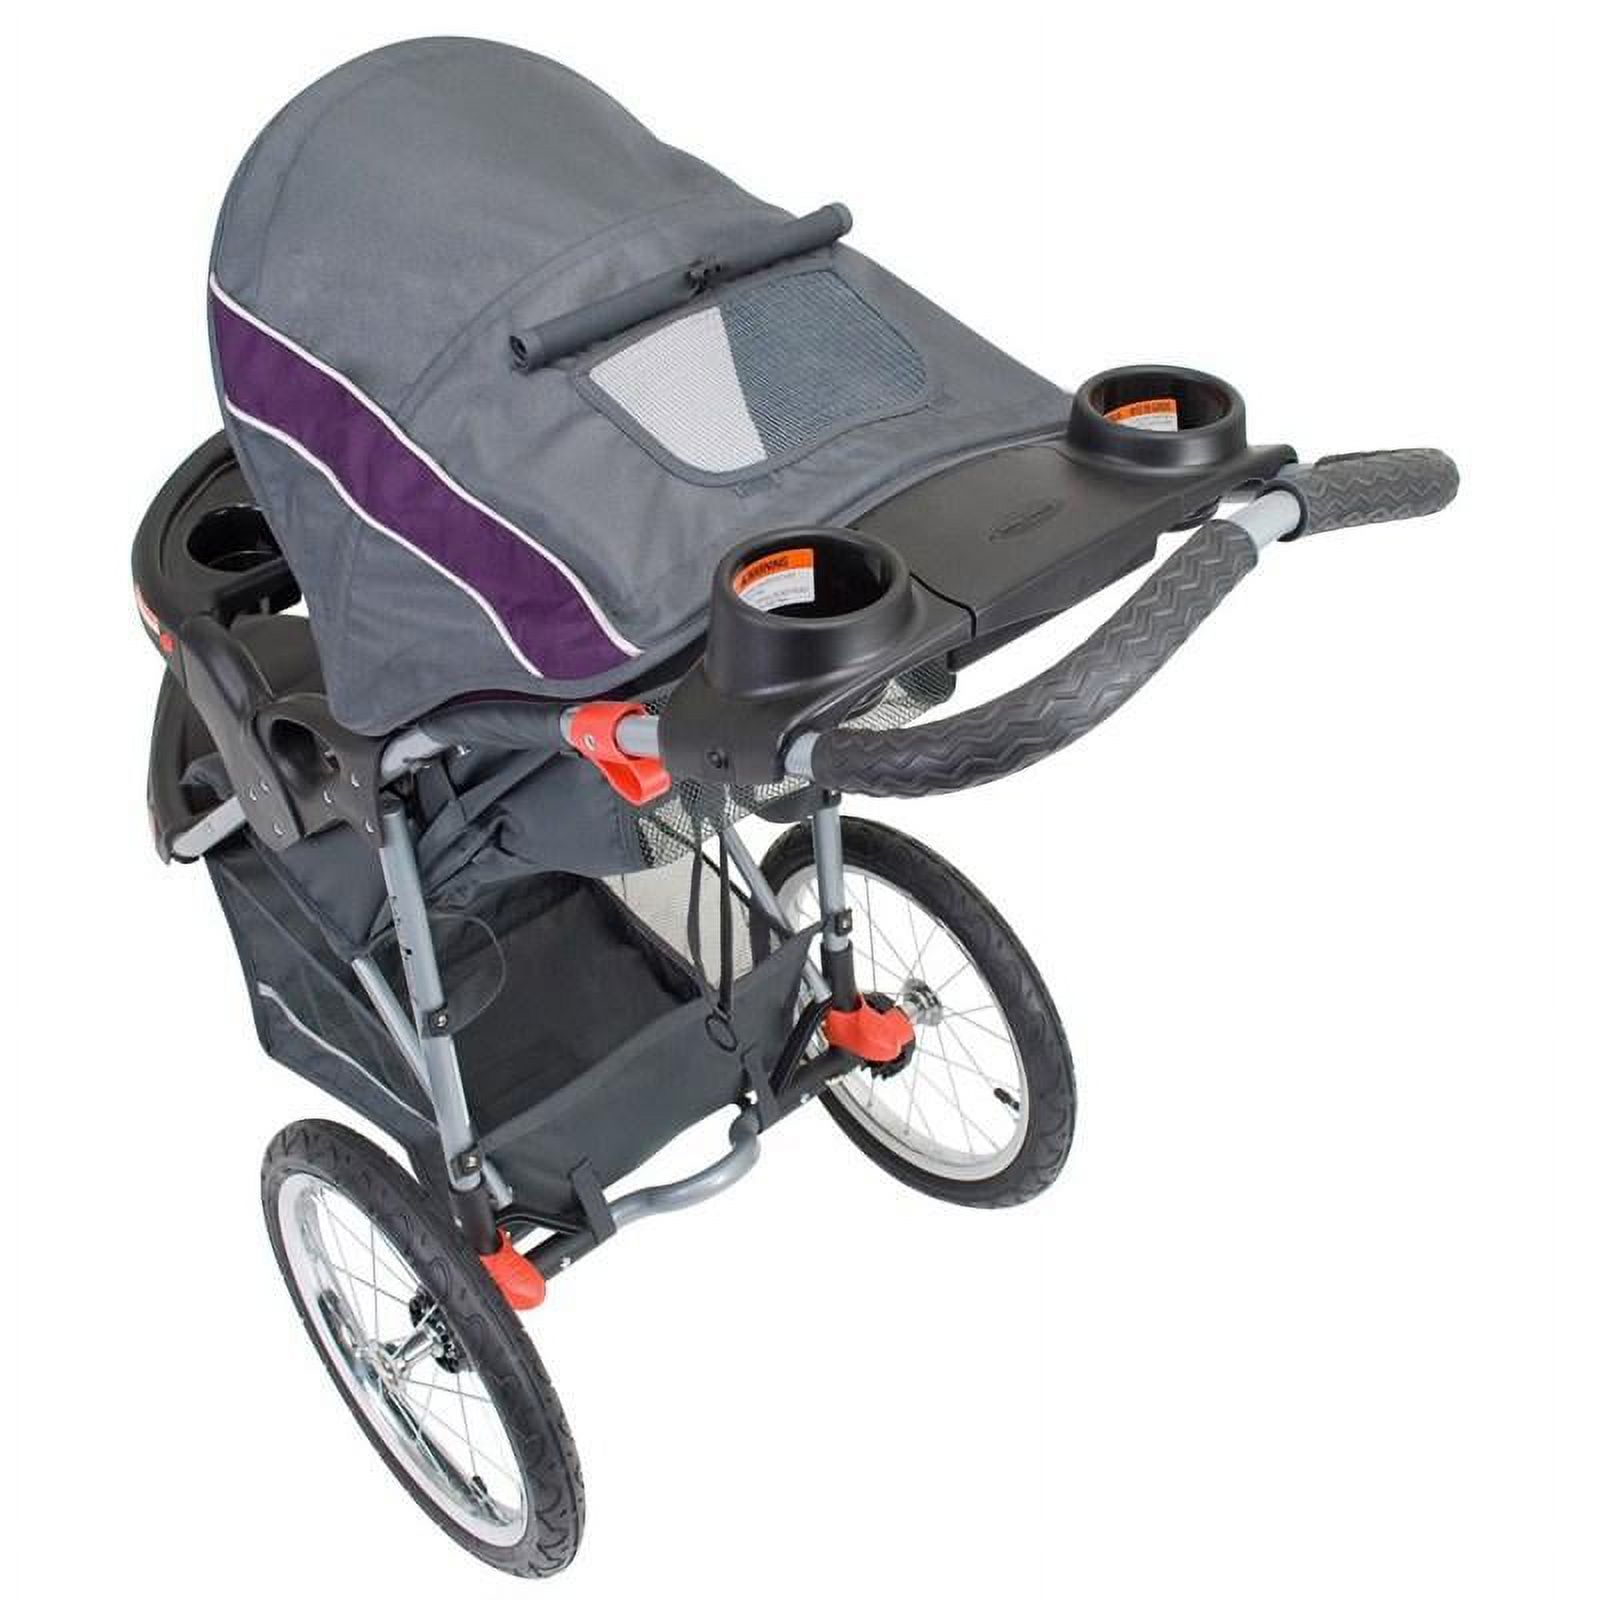 Baby Trend Expedition Travel System Stroller, Elixer - image 4 of 9